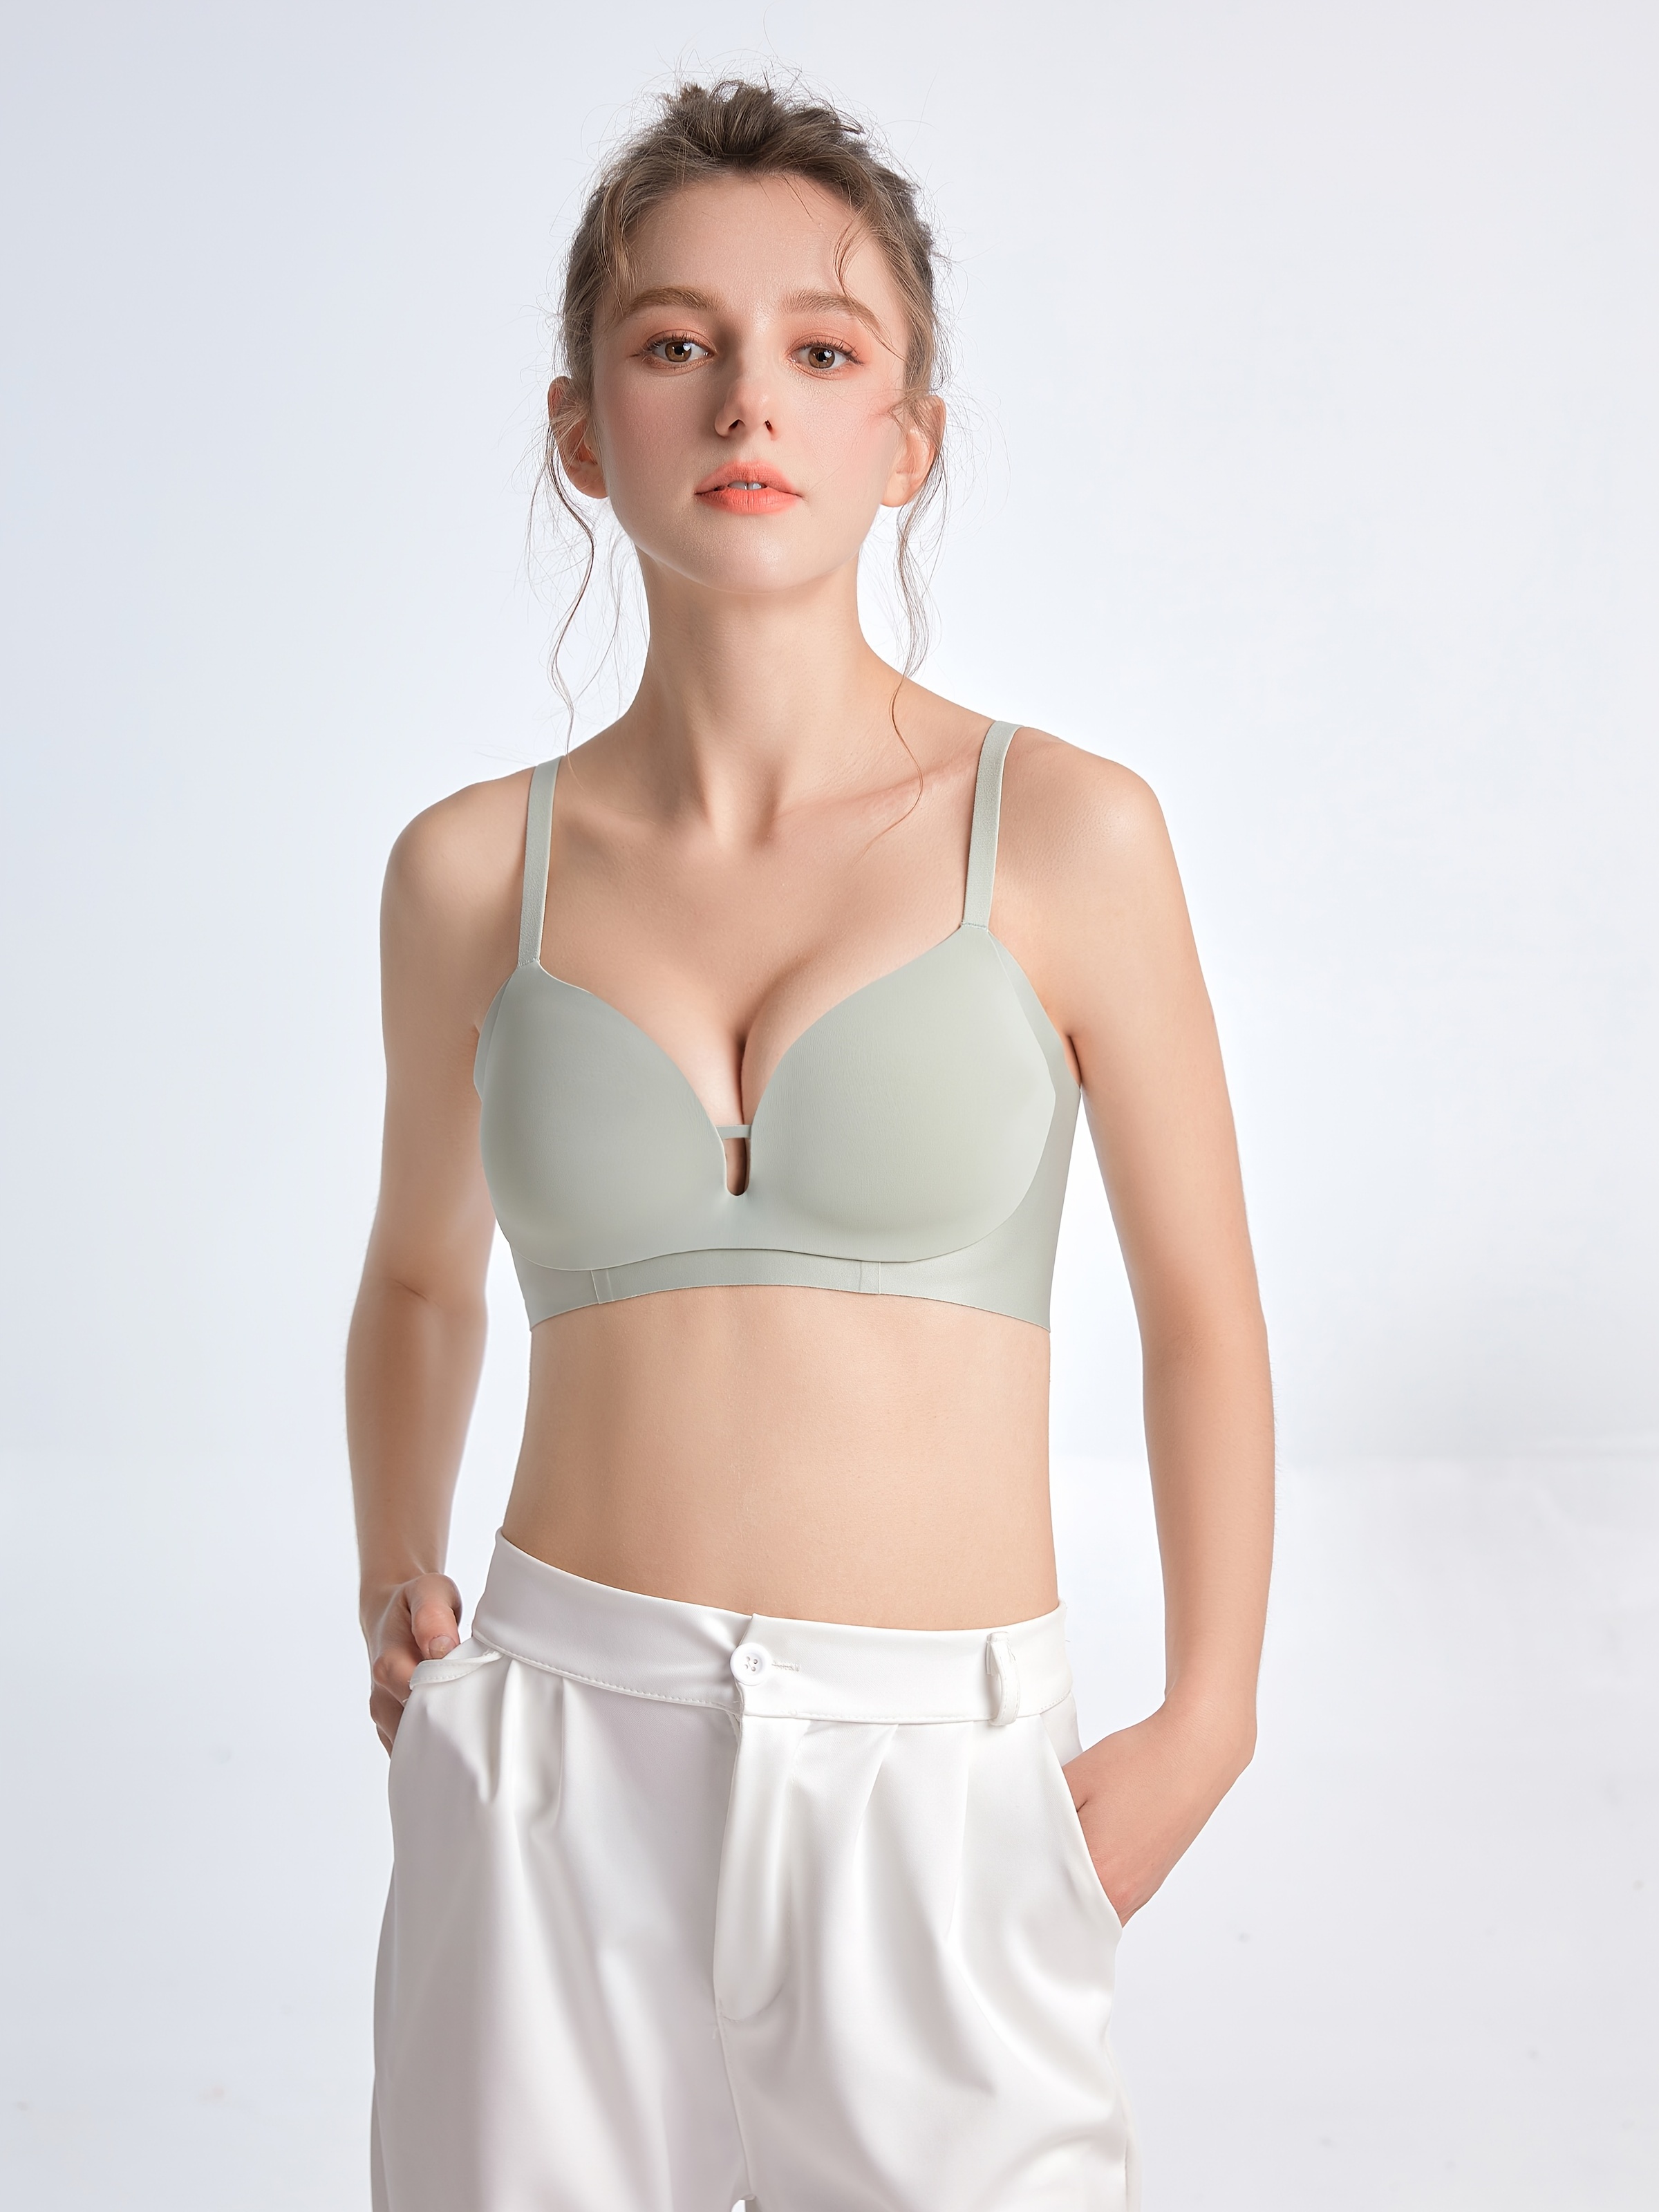 CHAOJIESI Seamless Push-up Bras for Women | Wire Free Soft Cup Everyday Bra